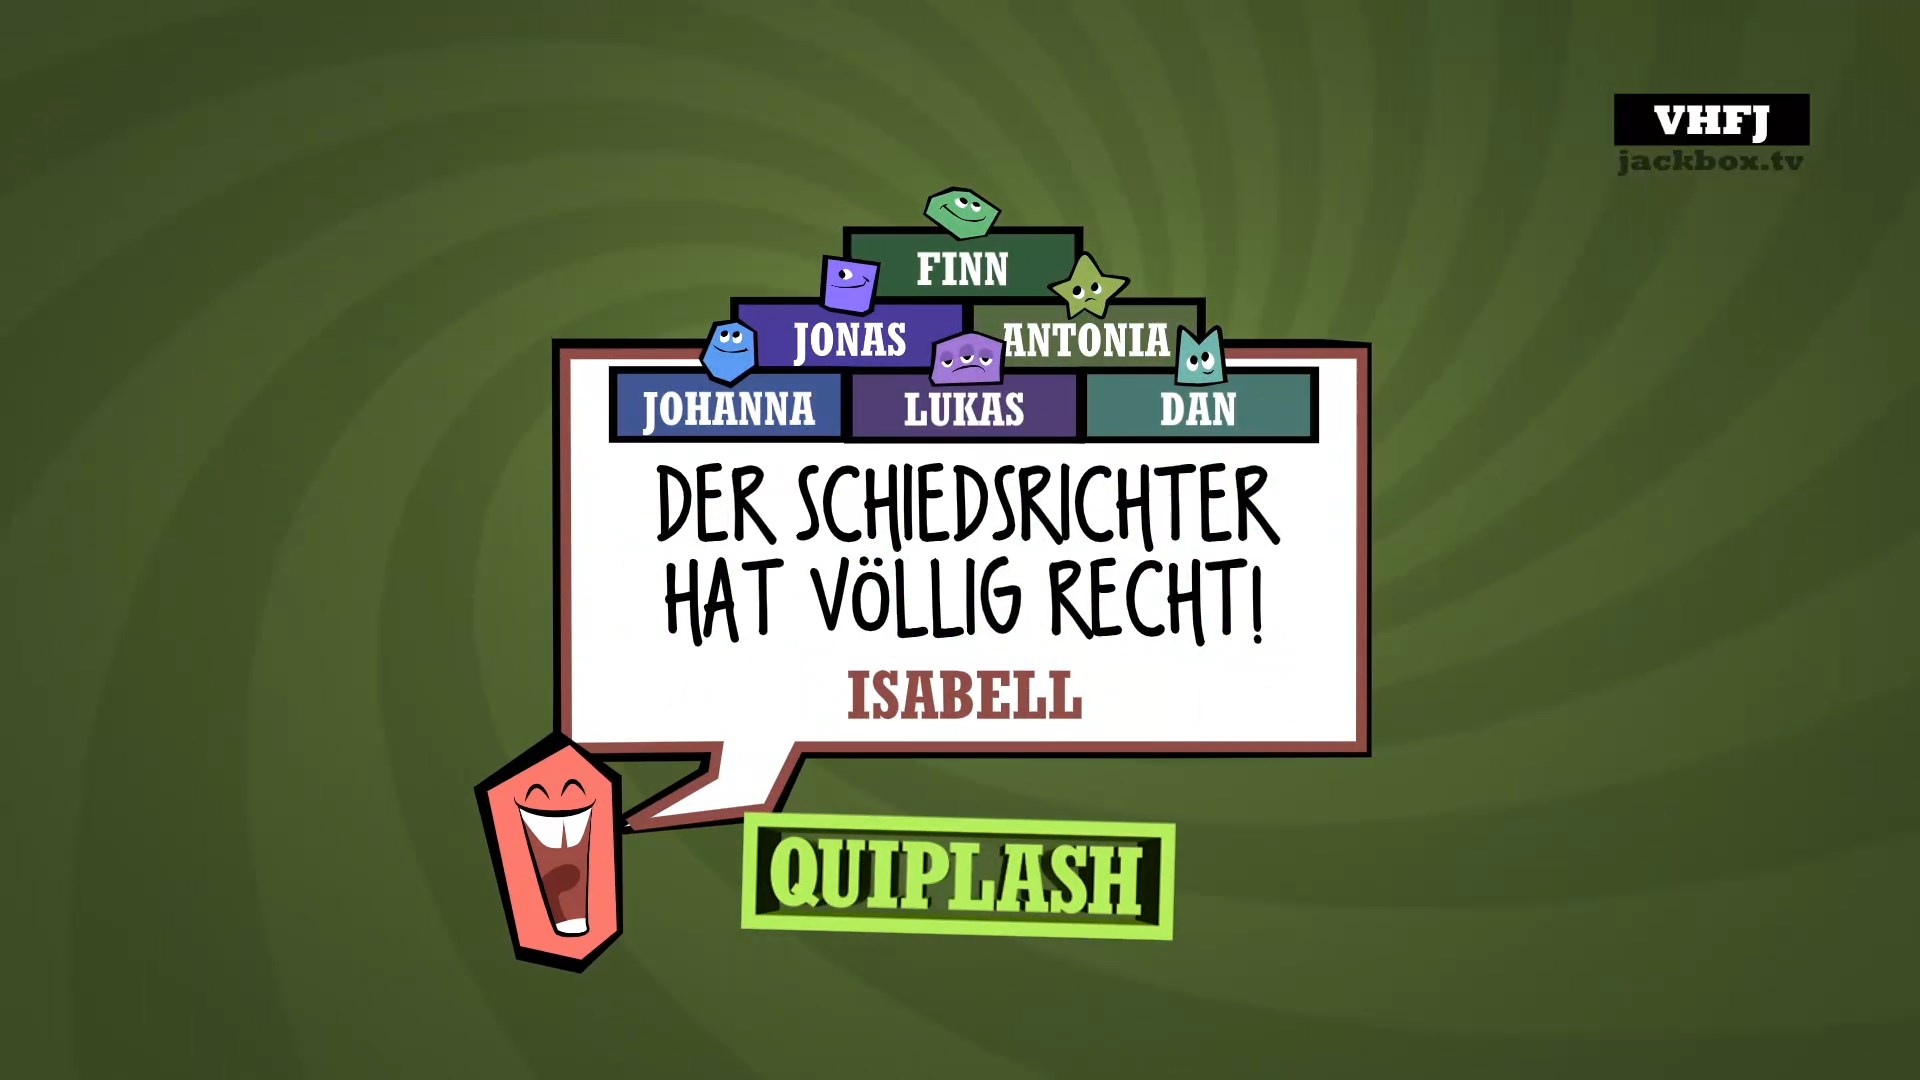 Quiplash 2. Quiplash 2 Jackbox games. Quiplash Jackbox games. The jackbox party русификатор